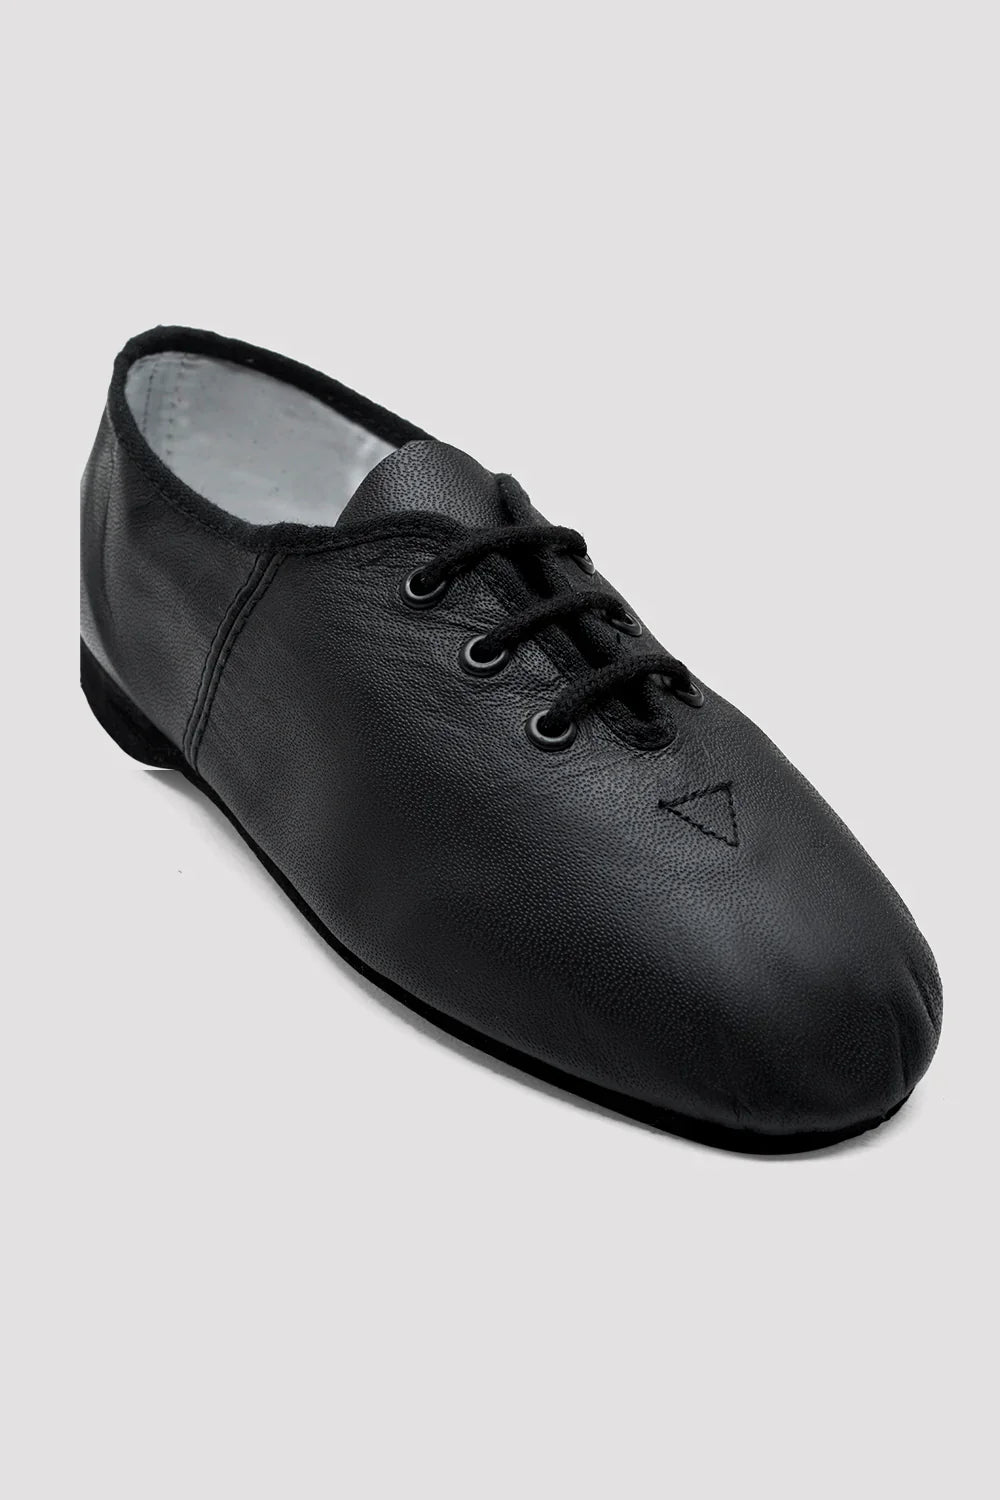 BLOCH ESSENTIAL Adults Lace up Jazz Shoe